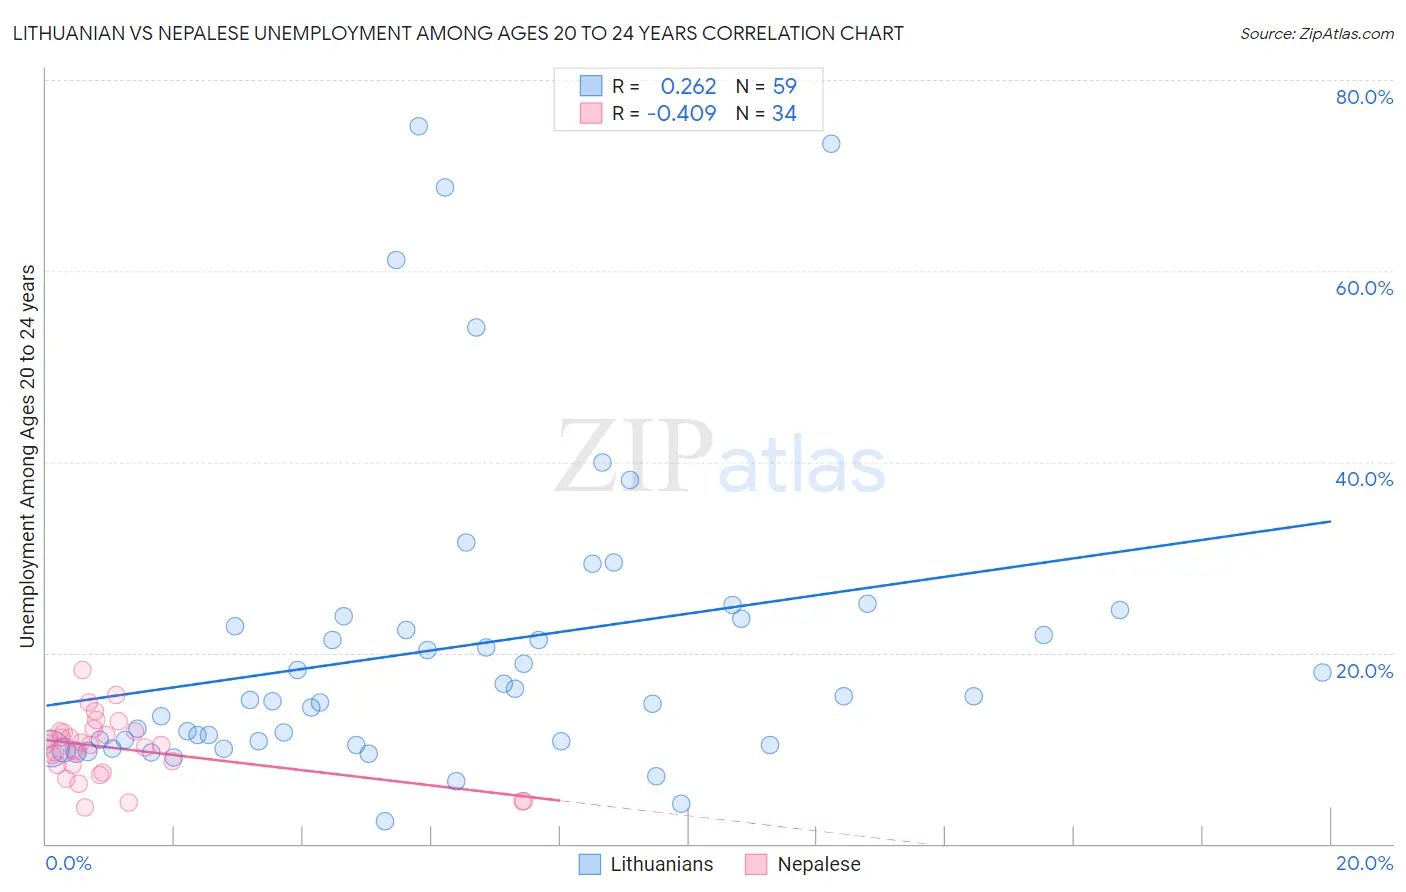 Lithuanian vs Nepalese Unemployment Among Ages 20 to 24 years